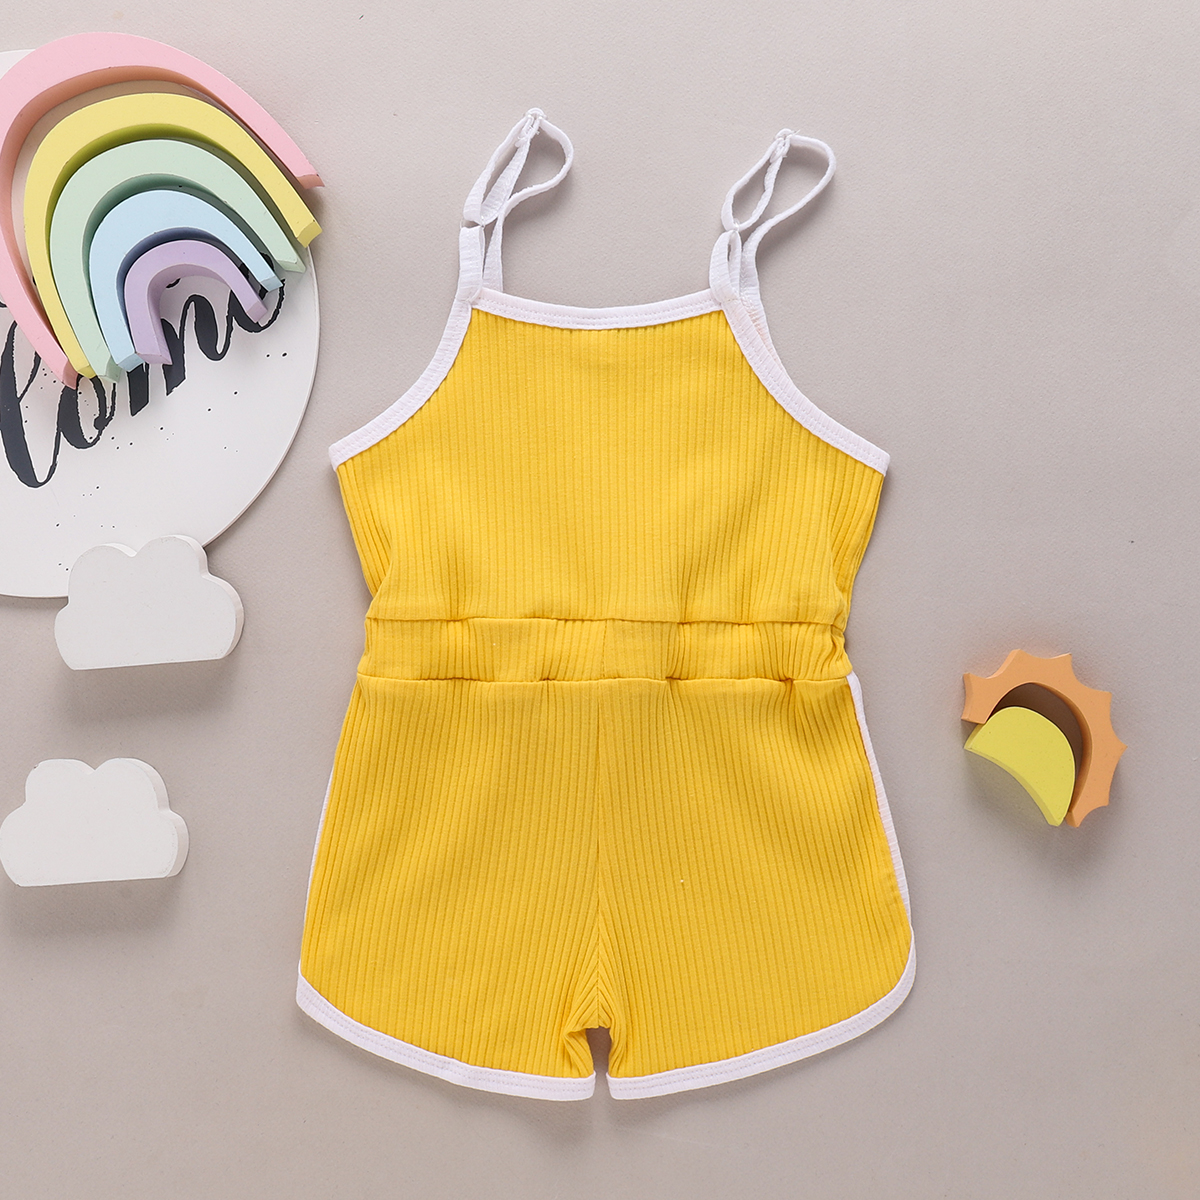 Summer solid color suspender jumpsuit fashion casual simple childrens clothingpicture3